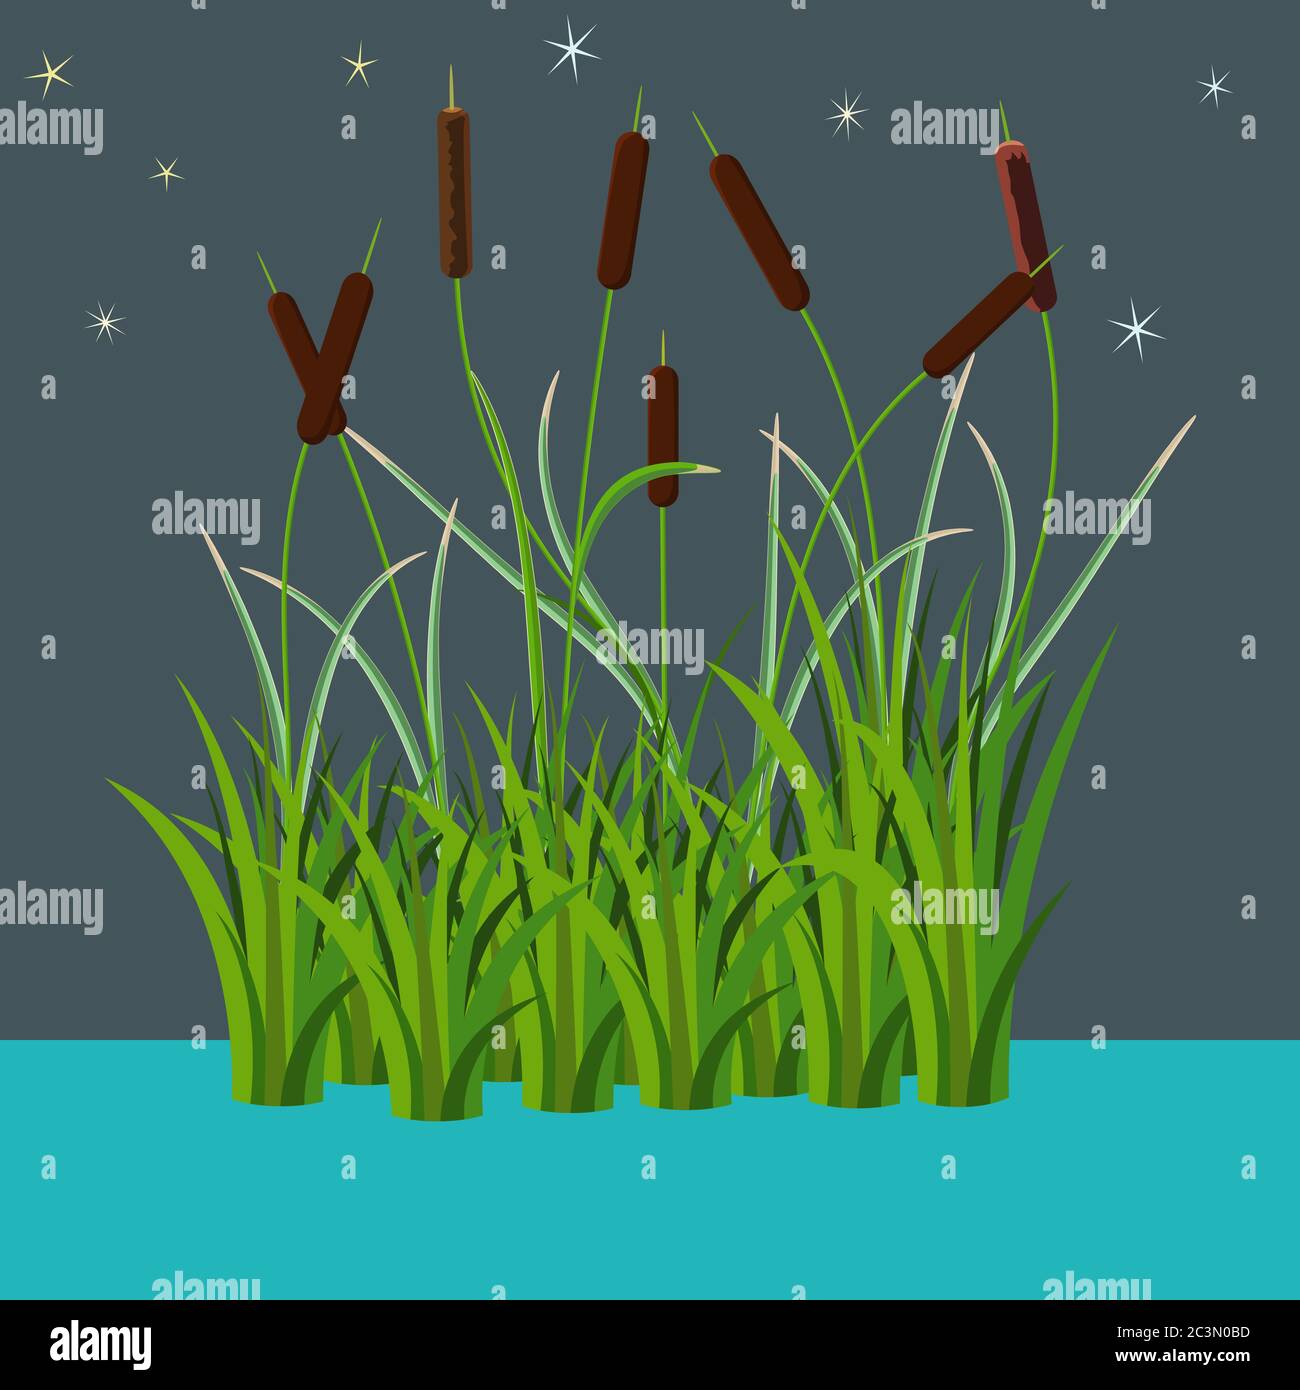 Bunch of reed bushes in the water vector illustration at night time dark style. isolated on white. Nature art work for cartoon props and landscape dec Stock Vector